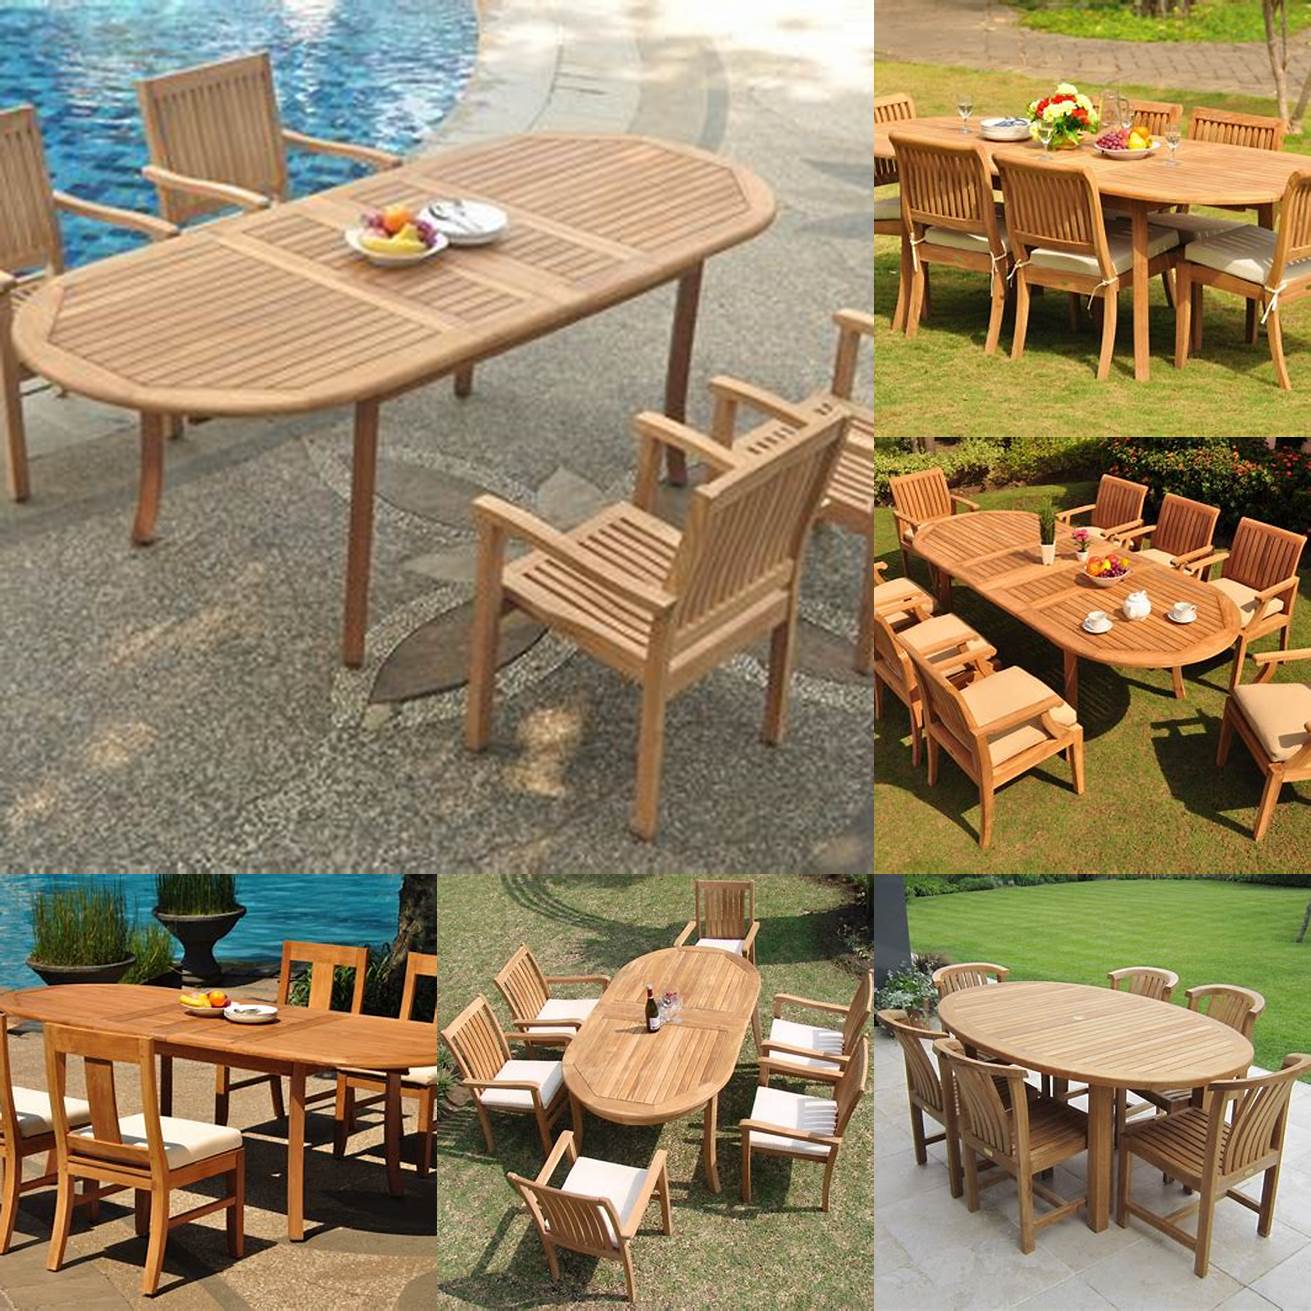 Teak Outdoor Dining Set with Oval Table